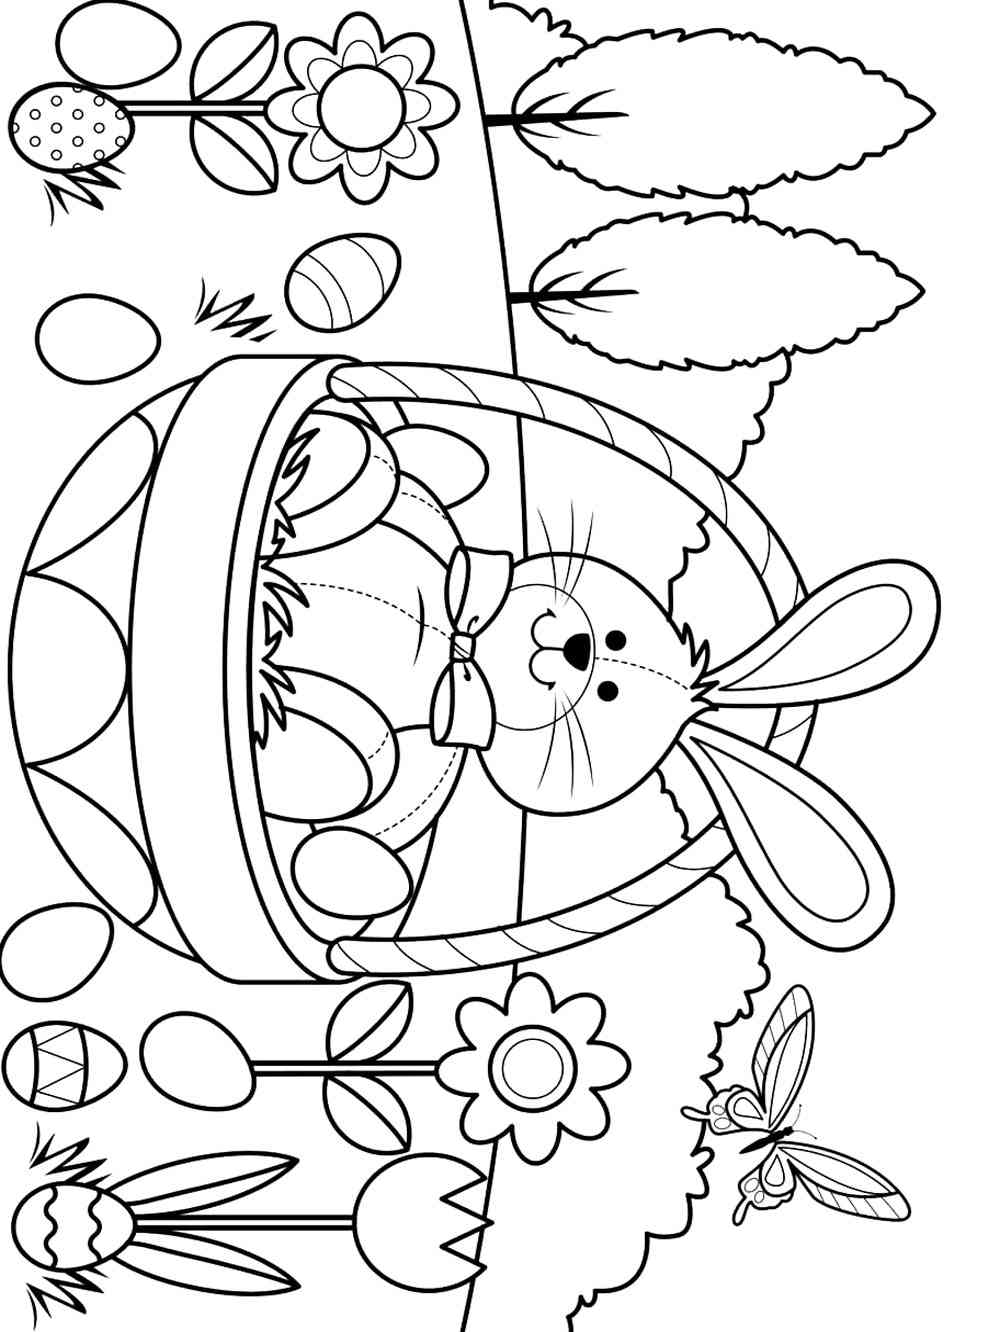 Easter Bunny coloring pages. Free Printable Easter Bunny coloring pages.